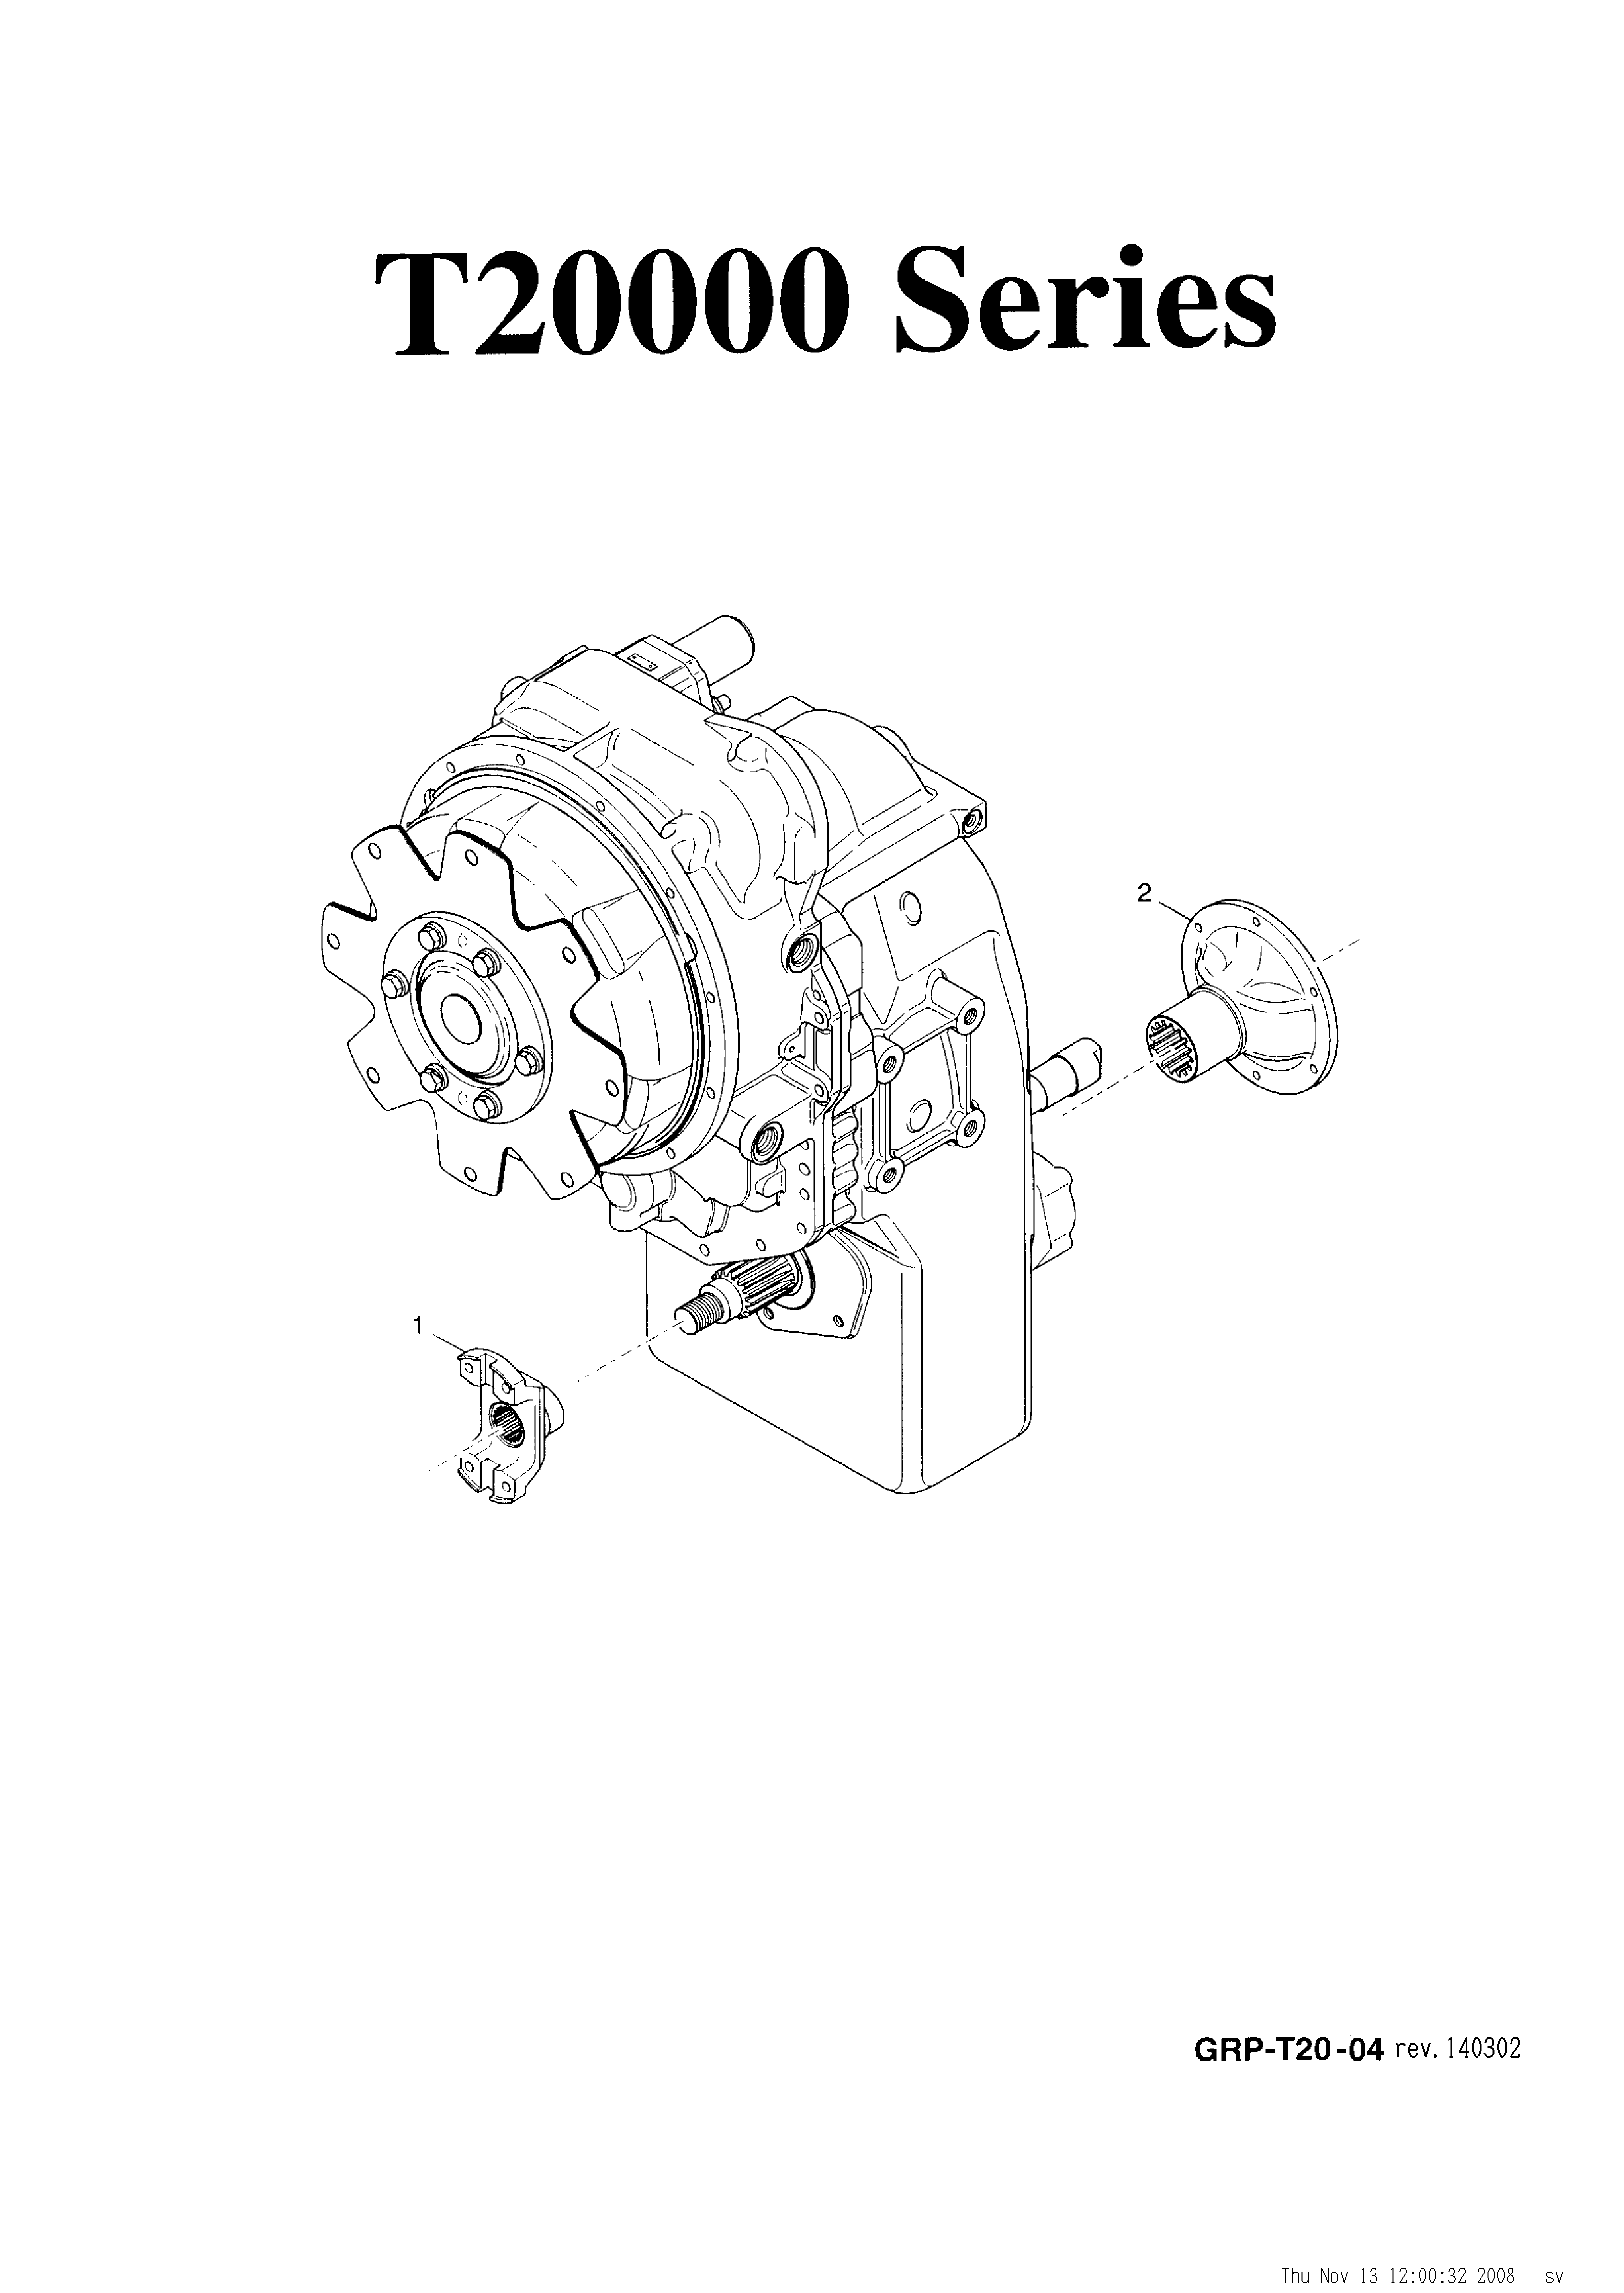 drawing for TIMBERLAND 545494 - PLATE (figure 2)